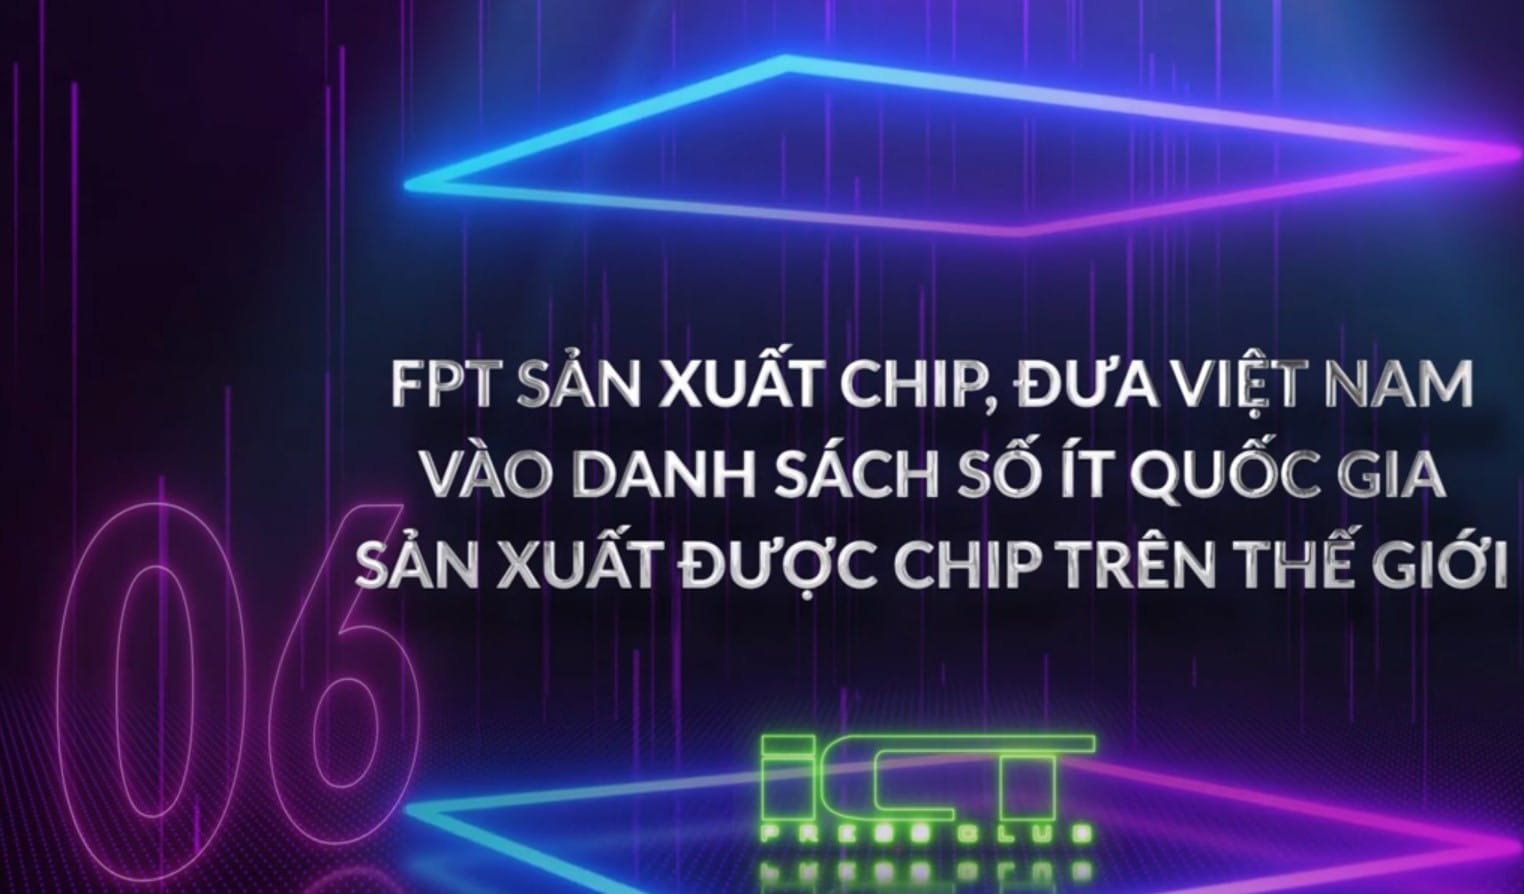 The launch of FPT's microchips ranked 6th out of the ten most outstanding IT milestones in 2022, voted by the Vietnam ICT Press Club